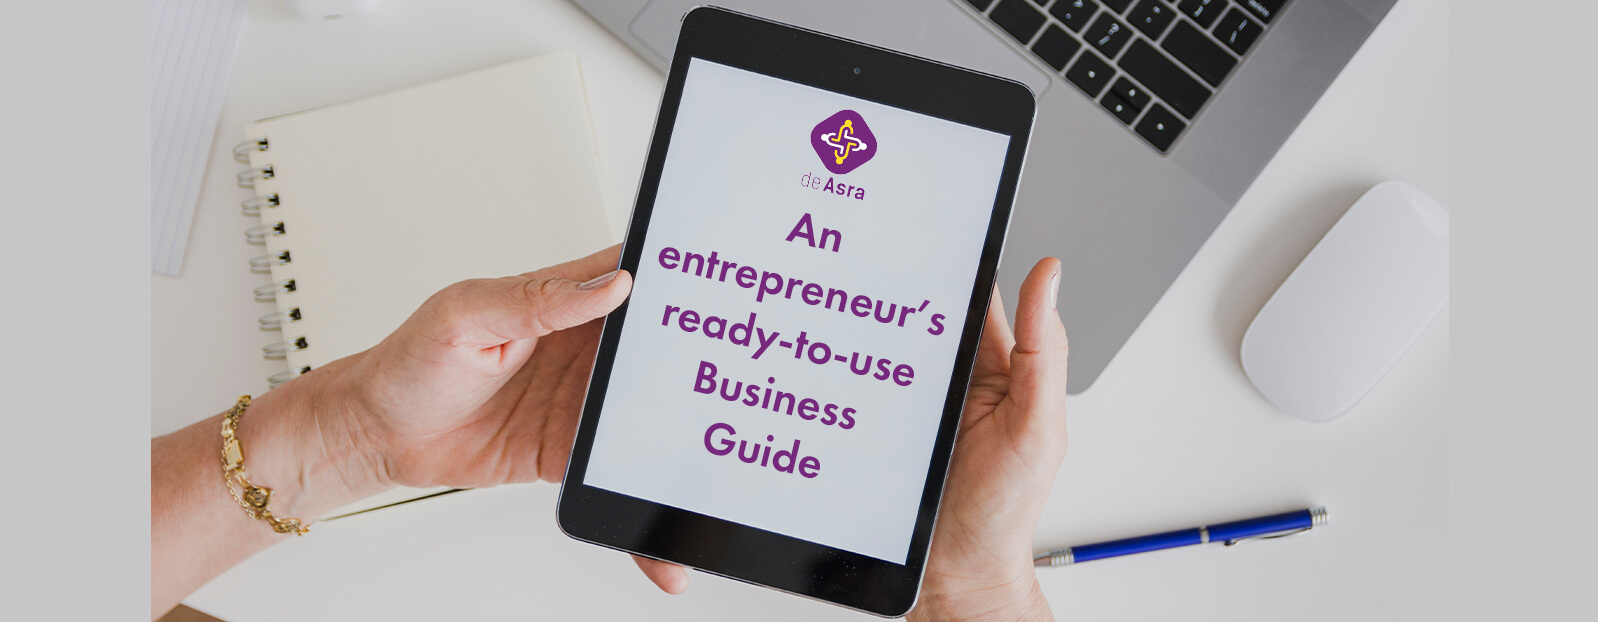 An entrepreneur’s ready-to-use Business Guide.